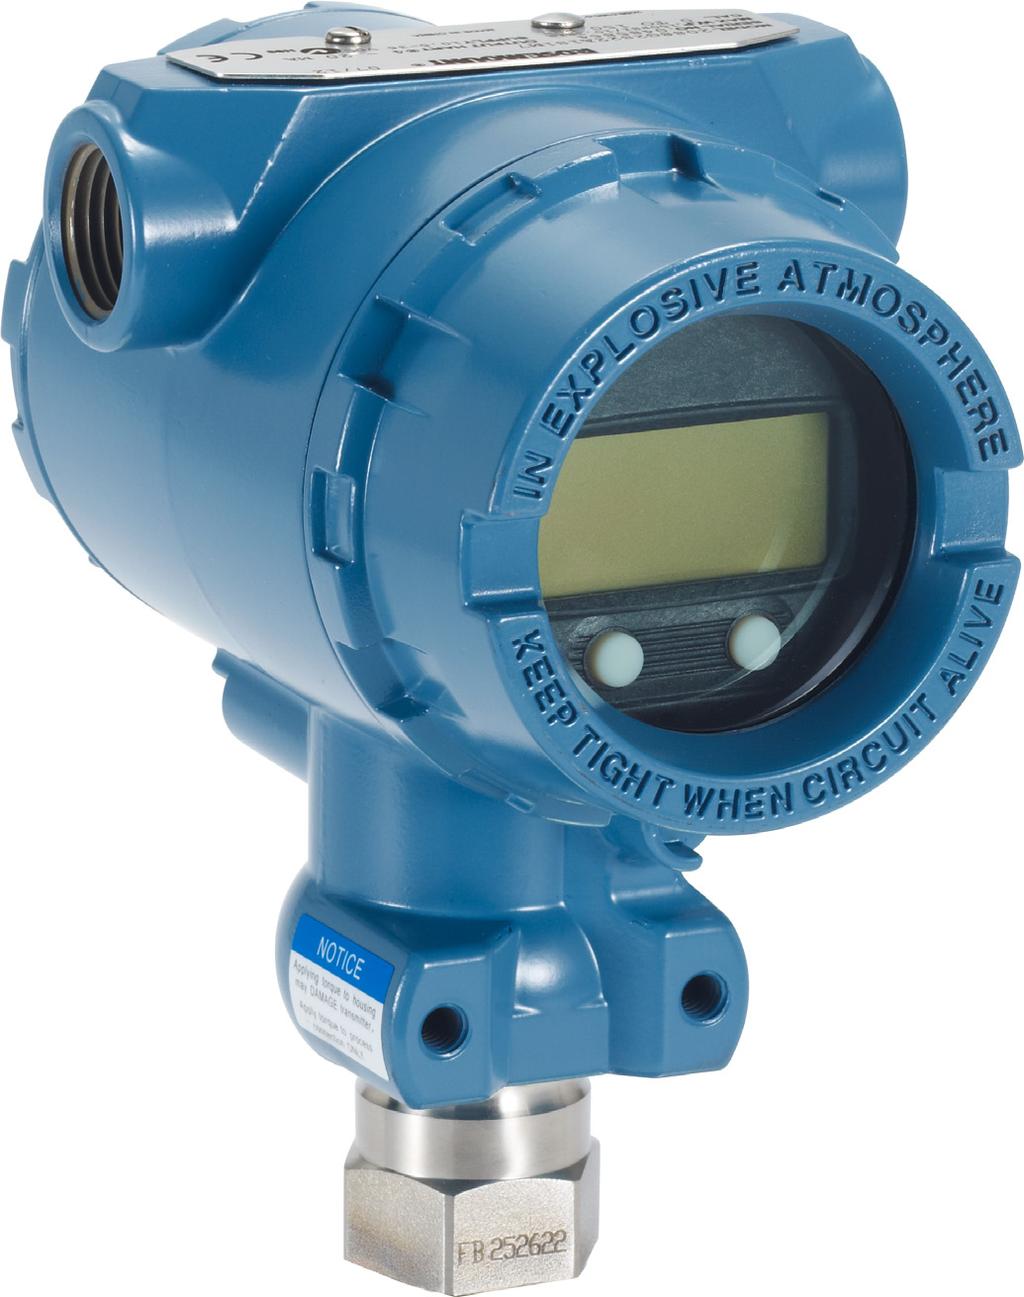 Product Data Sheet February 2015 00813-0100-4690, Rev PB Rosemount 2088 Absolute and Gage Pressure Transmitter Performance of 0.